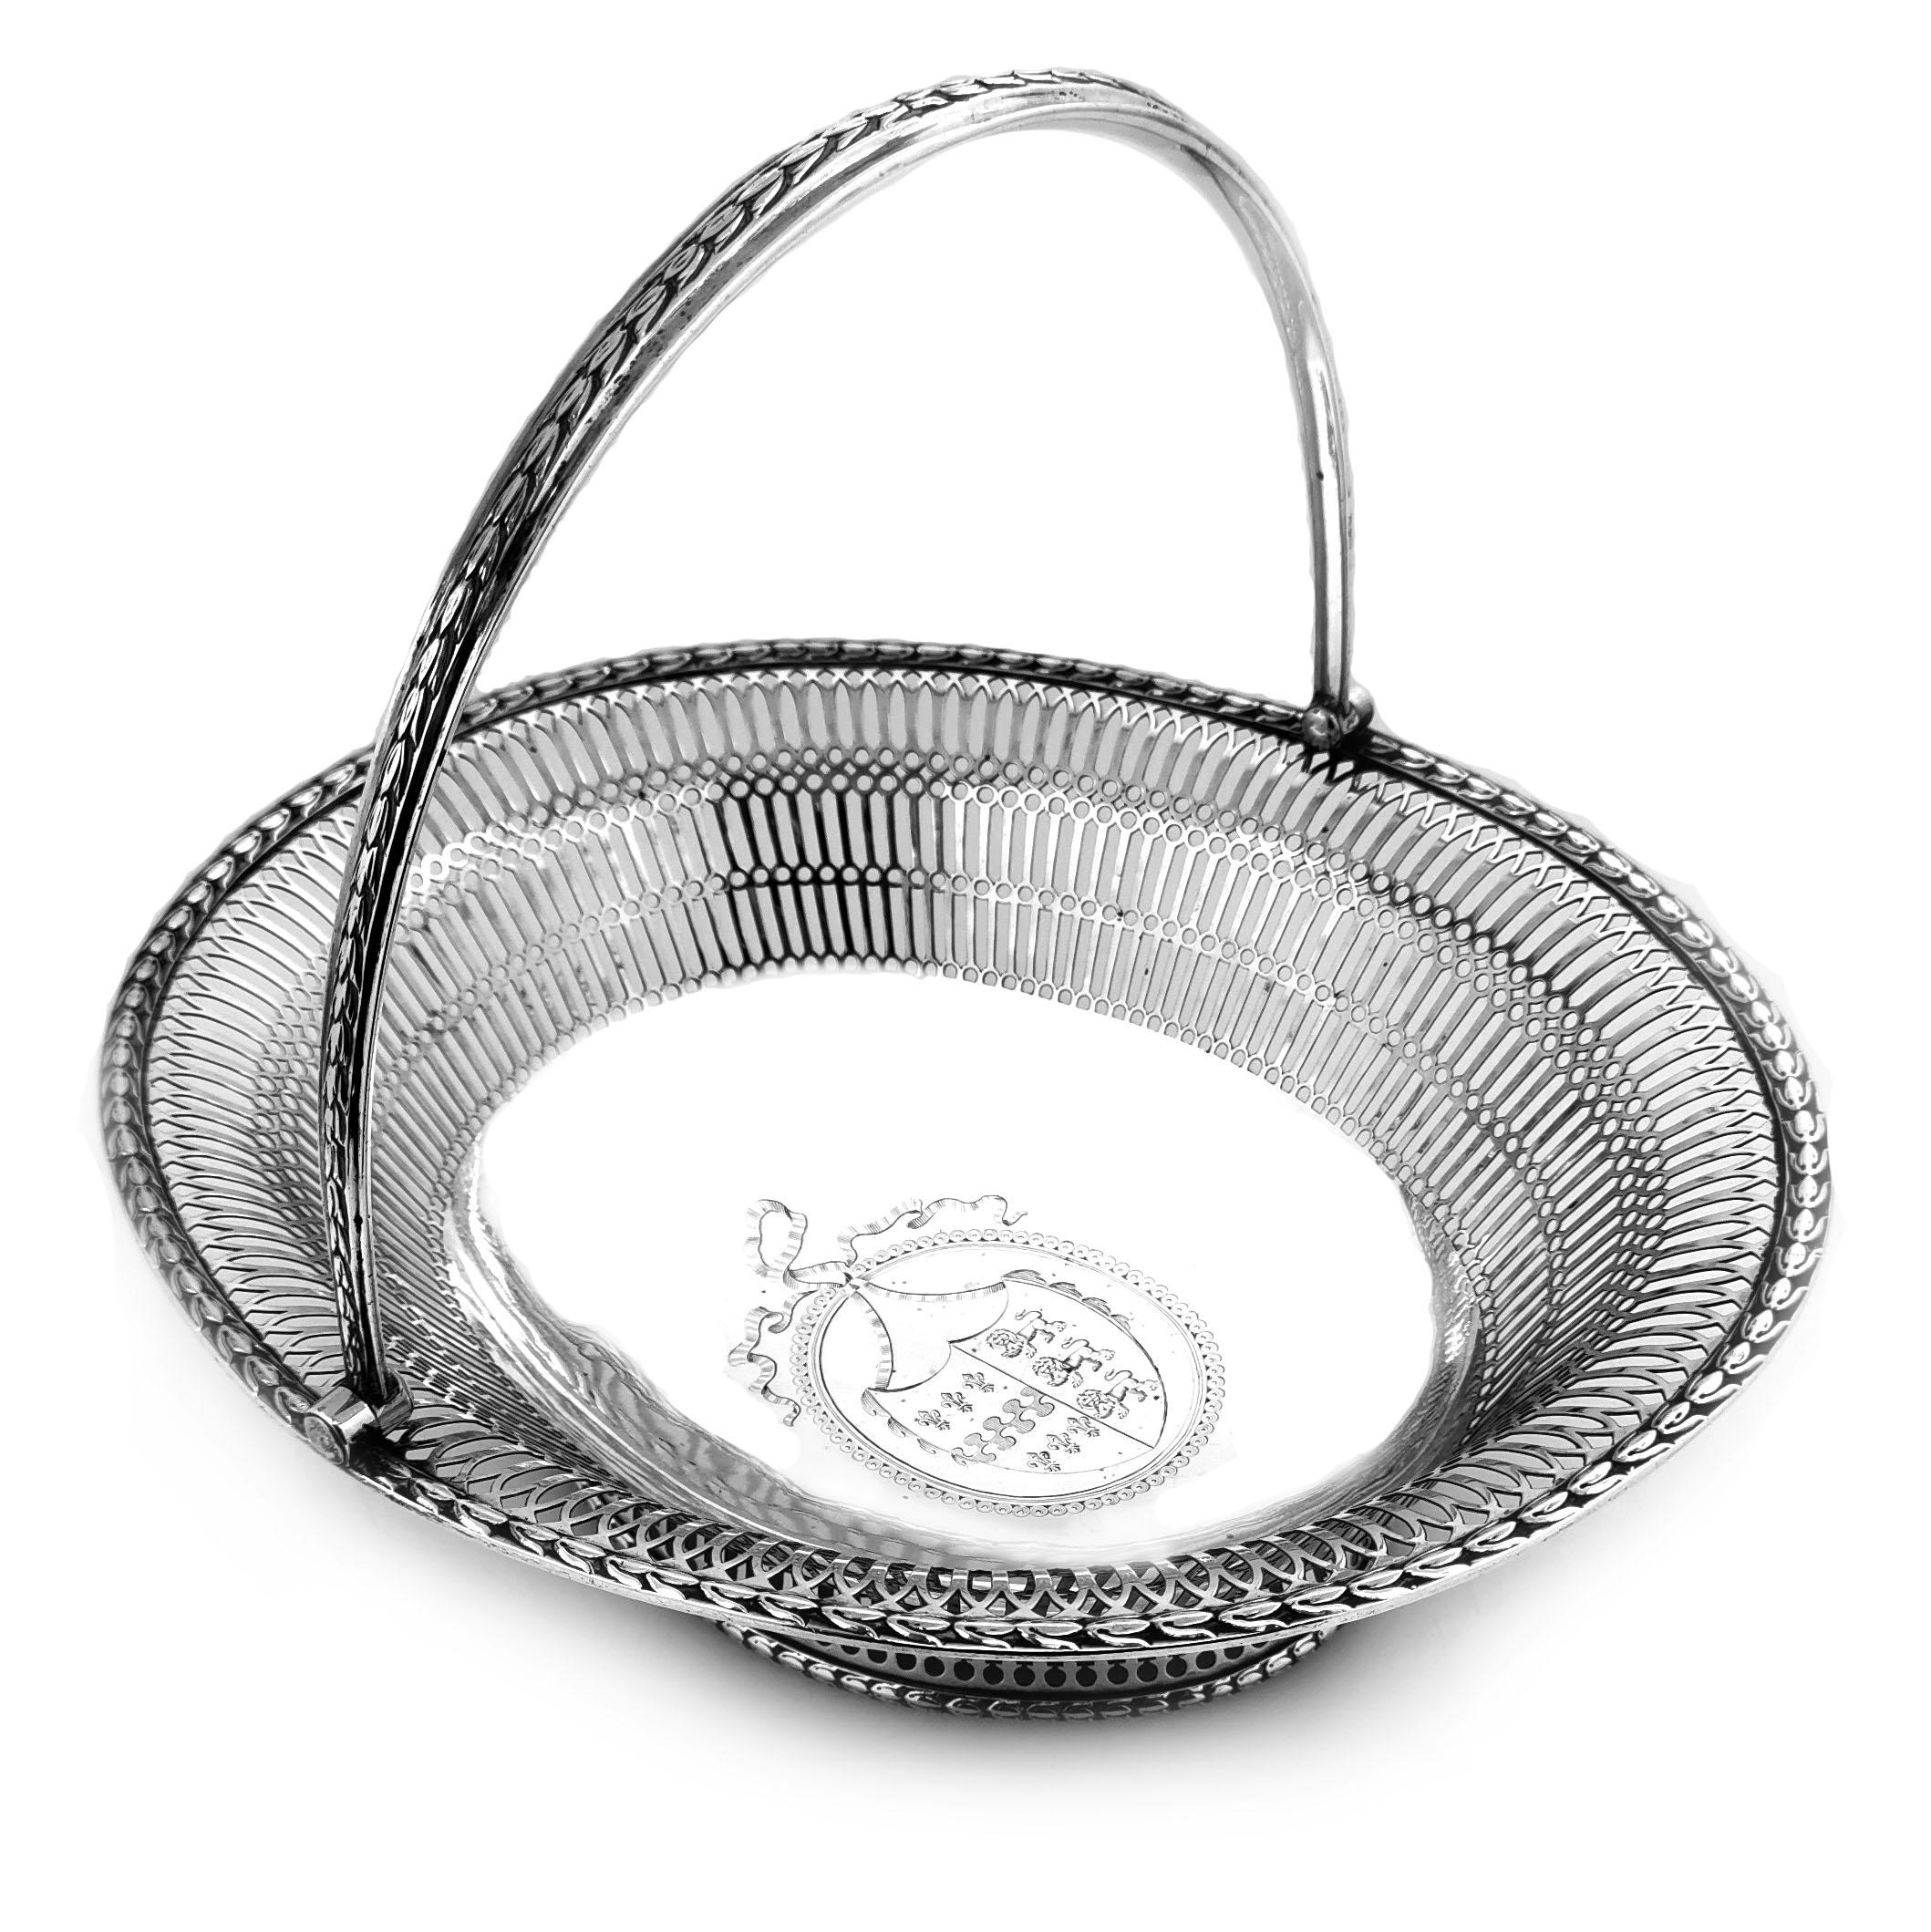 A magnificent antique George III solid Silver swing handled Cake Basket in a classic oval shape. This Silver Georgian Basket has an elegant pierced pattern on the sides and rim of the body and the pedestal foot. This decorative serving Basket had a